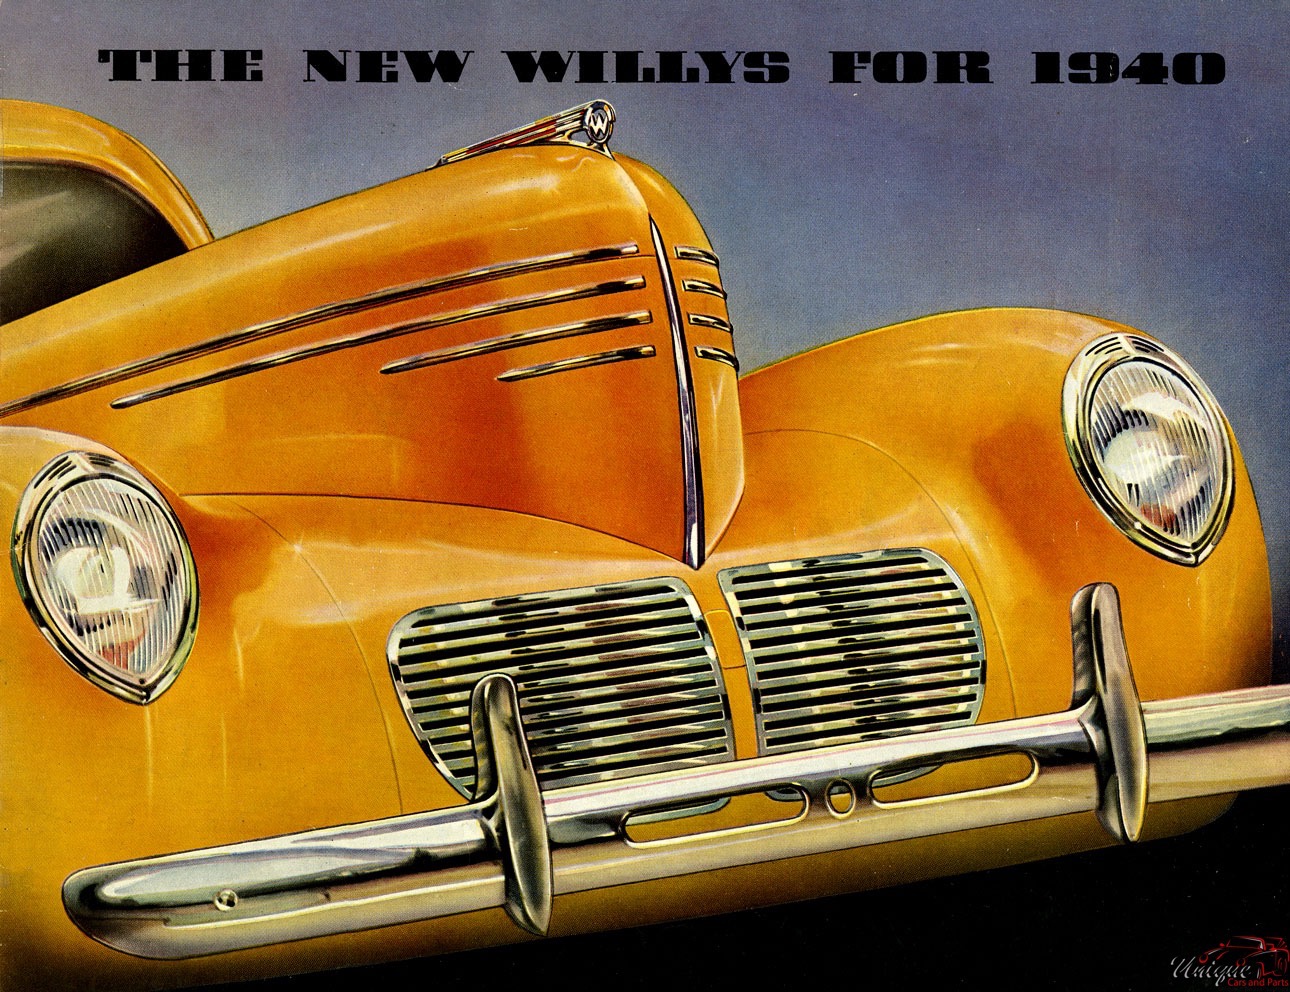 1940 Willys Full-Line Brochure Page 18